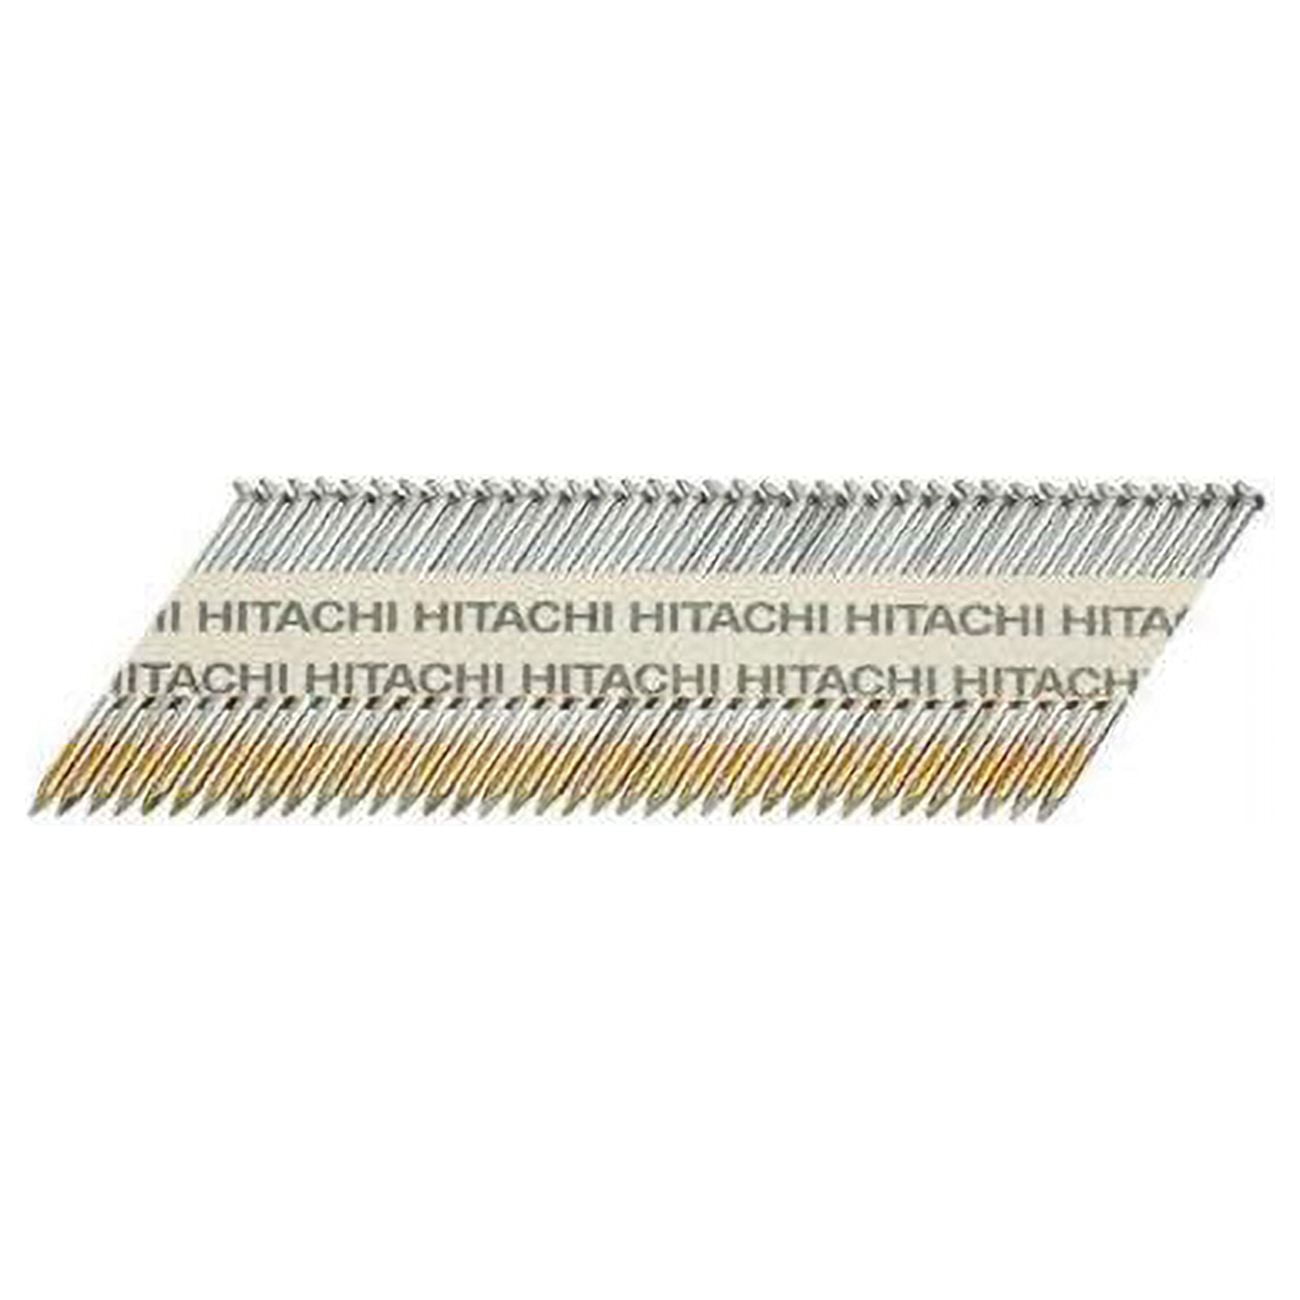 Picture of Metabo power tools 2596690 30 deg 10 Gauge Ring Shank Angled Strip Framing Nails  2.38 in. x 0.113 in. Dia. - Pack of 2000